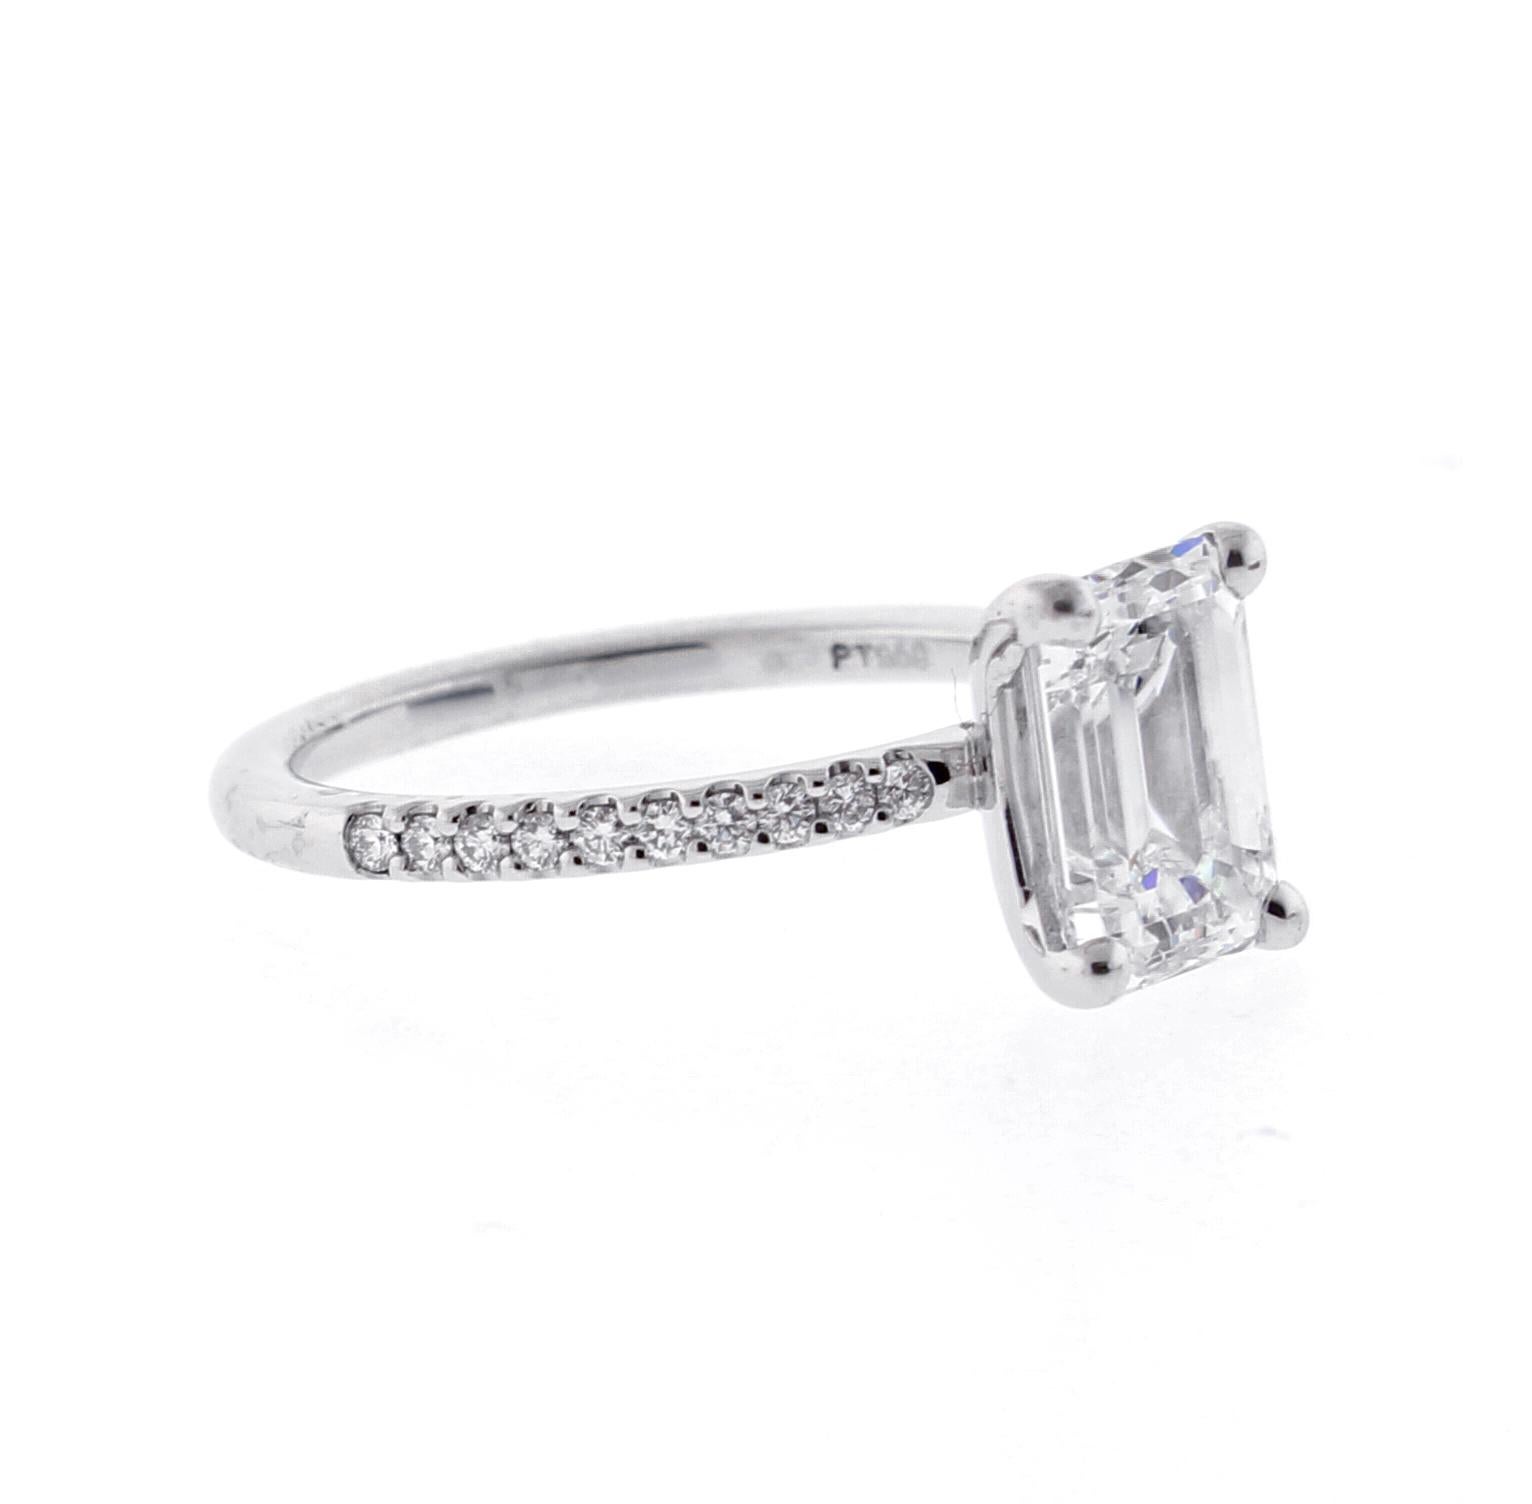 A perfectly proportioned Emerald Cut Diamond Solitaire sits on a band on diamonds
♦ Metal: Platinum
♦ Diamond=2.02 carats I color VS1 clarity
♦  20 Diamonds=.15
♦ Circa 2018
♦ Size 6, Resizable
♦ Packaging: Pampillonia presentation box 
♦ Condition: